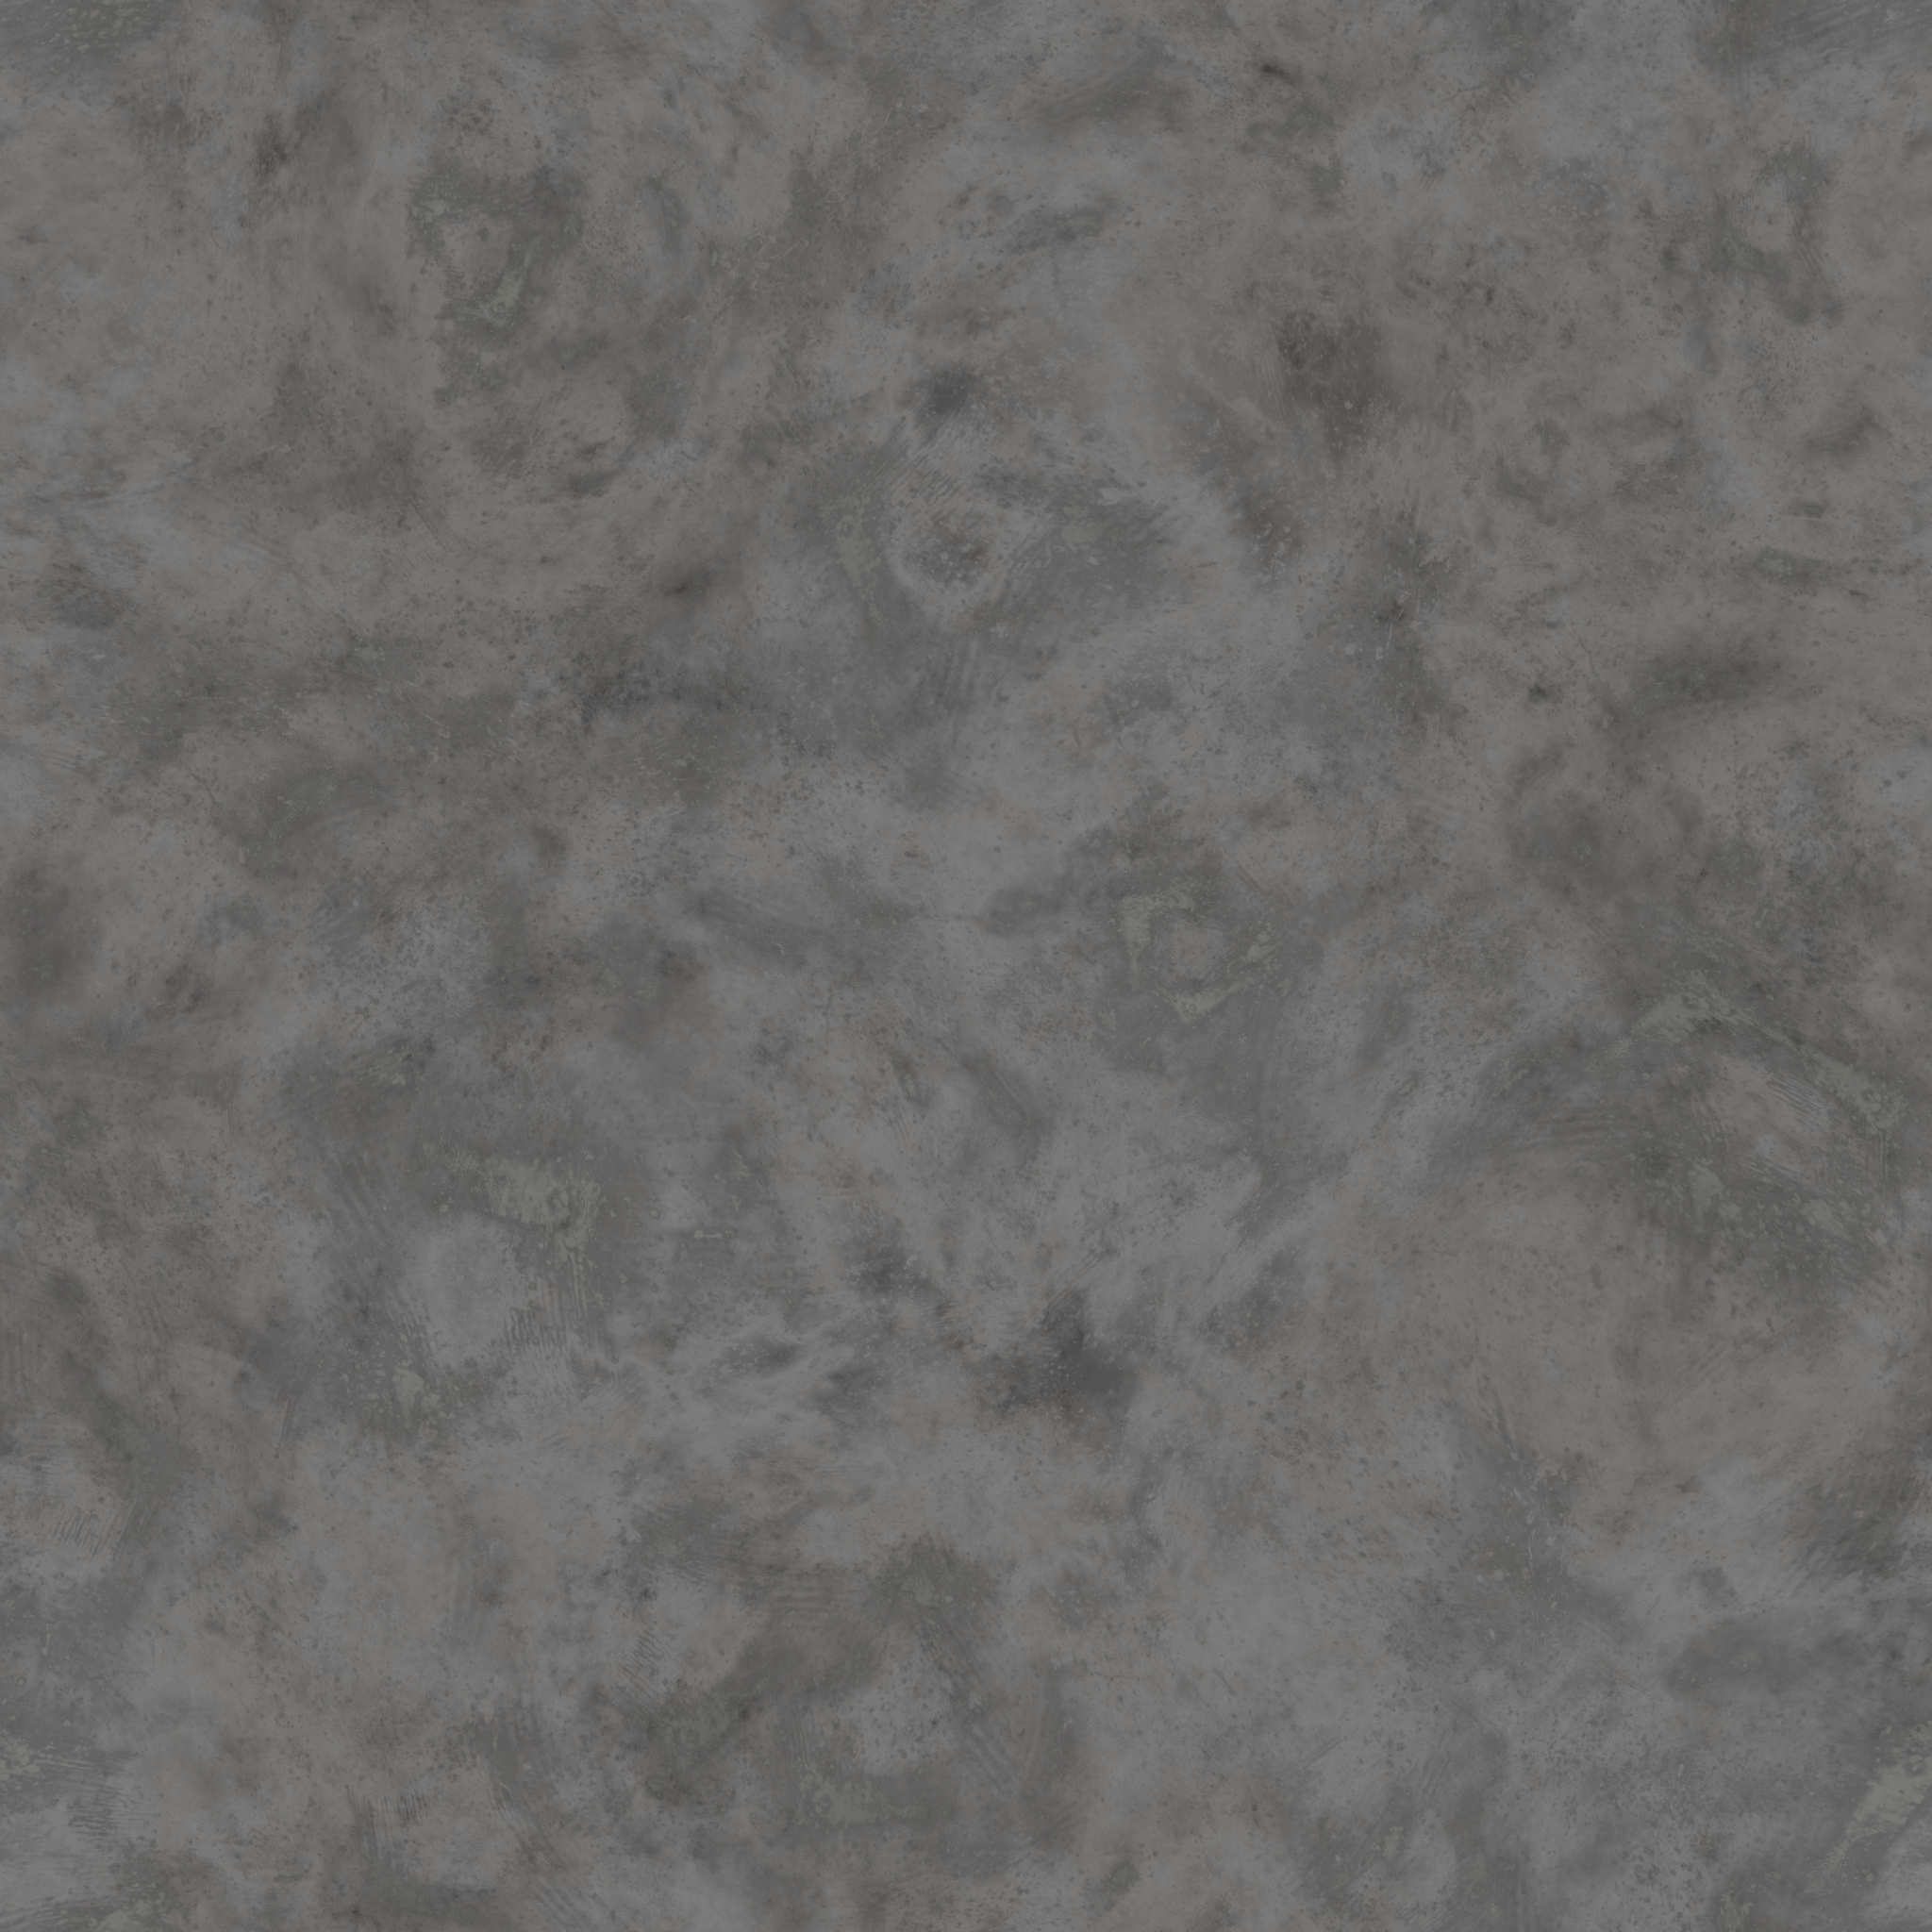 Polished Concrete 01 Free Pbr Texture From Cgbookcase Com